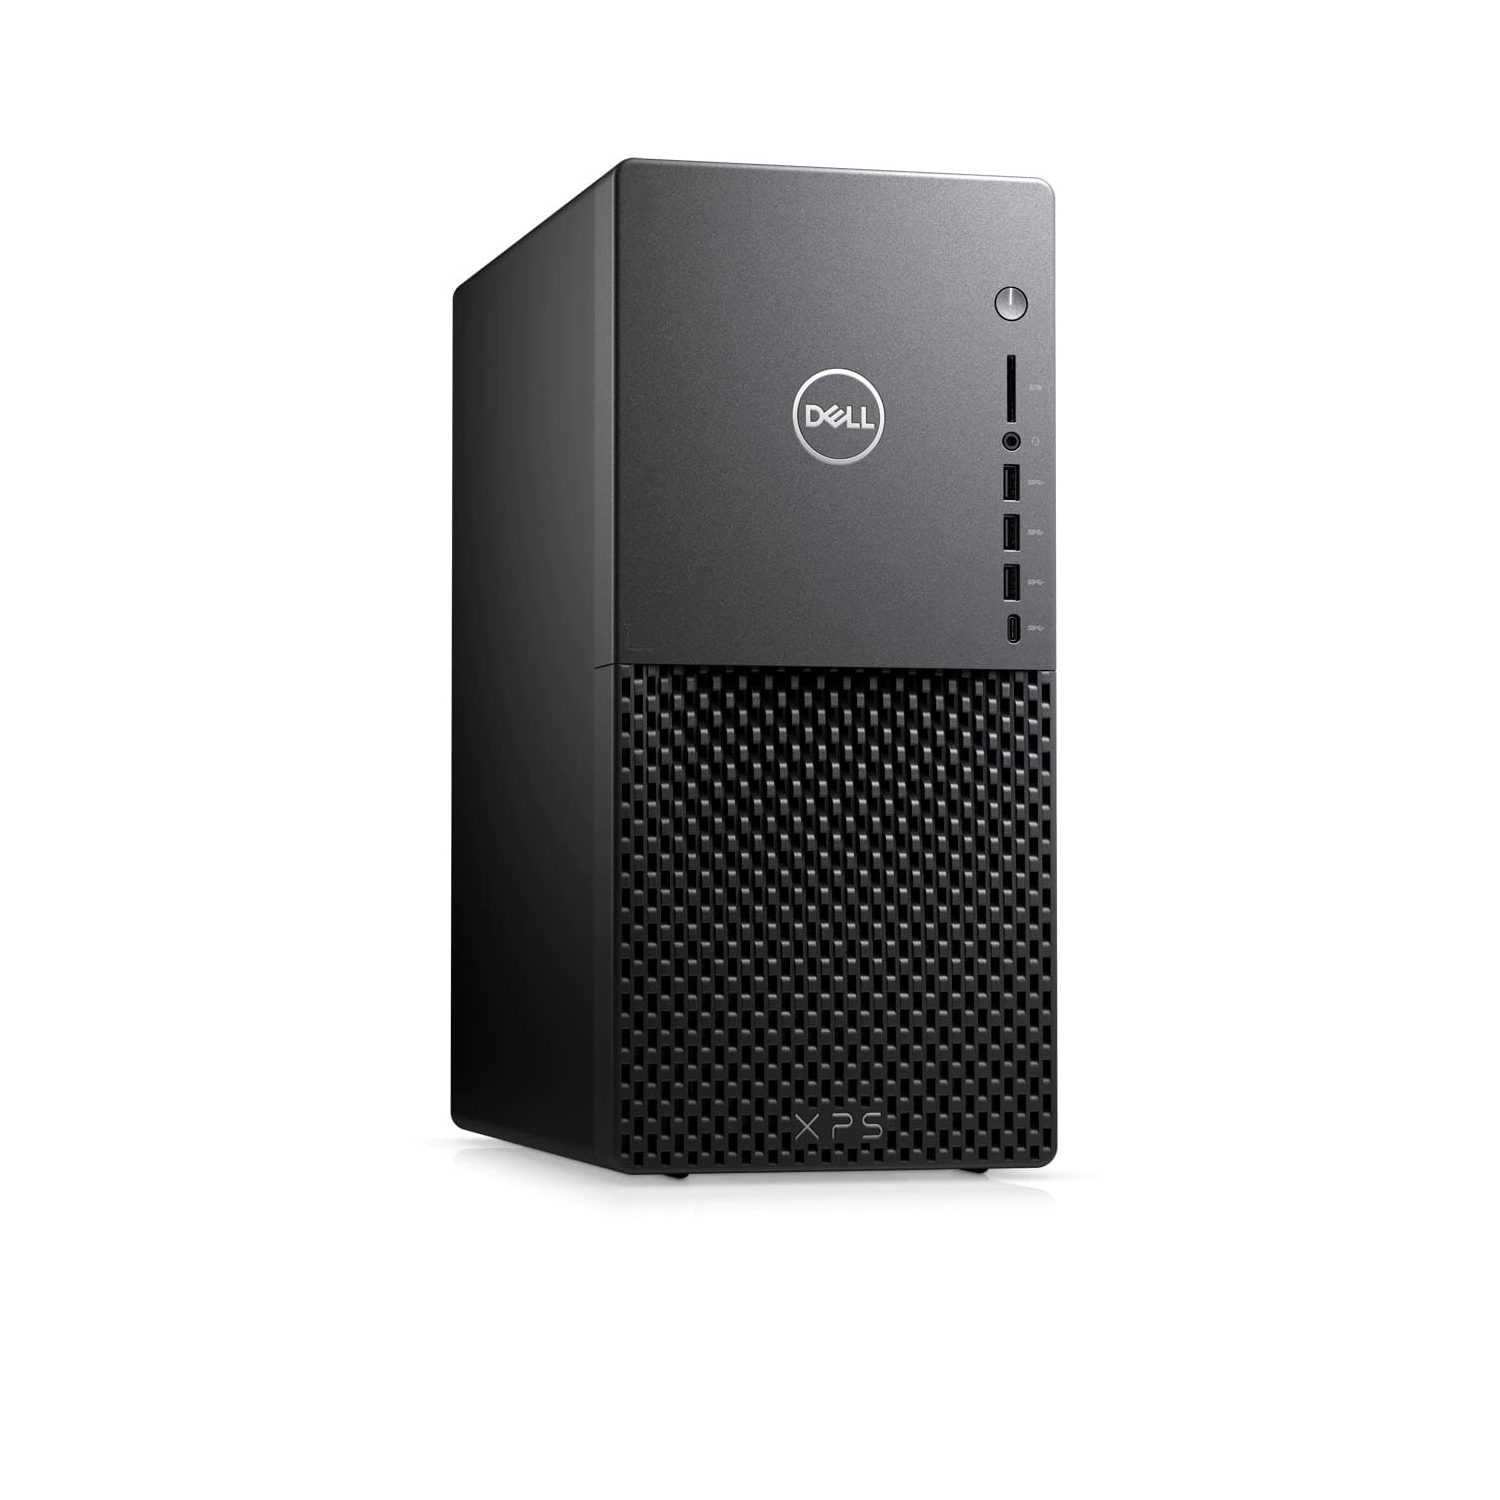 Refurbished (Excellent) - Dell XPS 8940 Desktop (2020) | Core i7 - 2TB HDD + 1TB SSD - 32GB RAM - 1660 Ti | 8 Cores @ 4.8 GHz - 10th Gen CPU Certified Refurbished